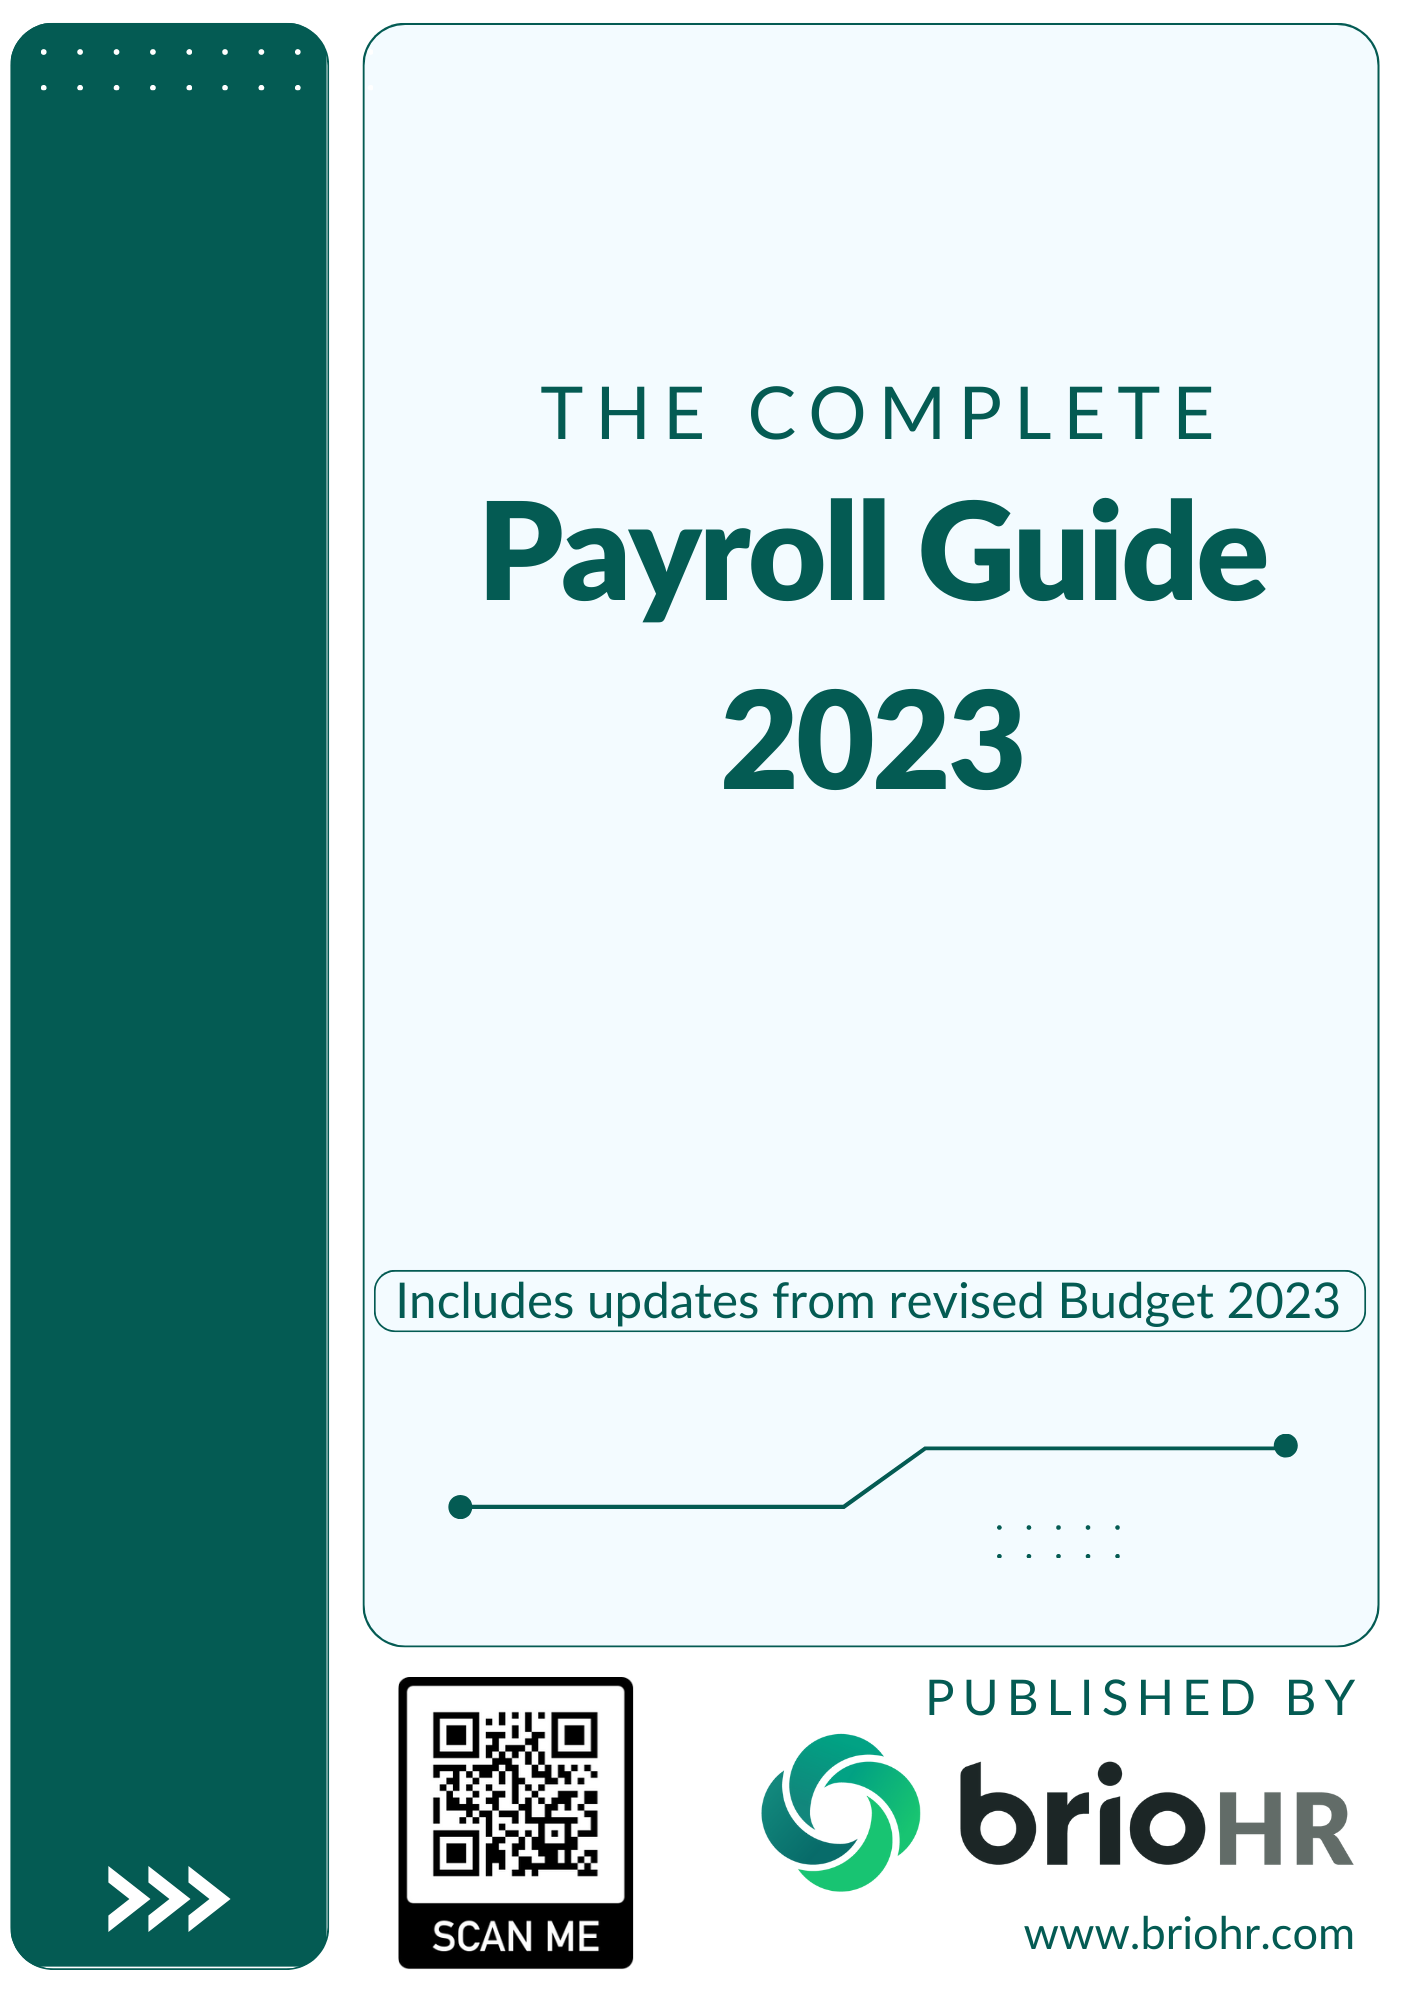 Welcome to BrioHR’s Payroll Guide 2023!